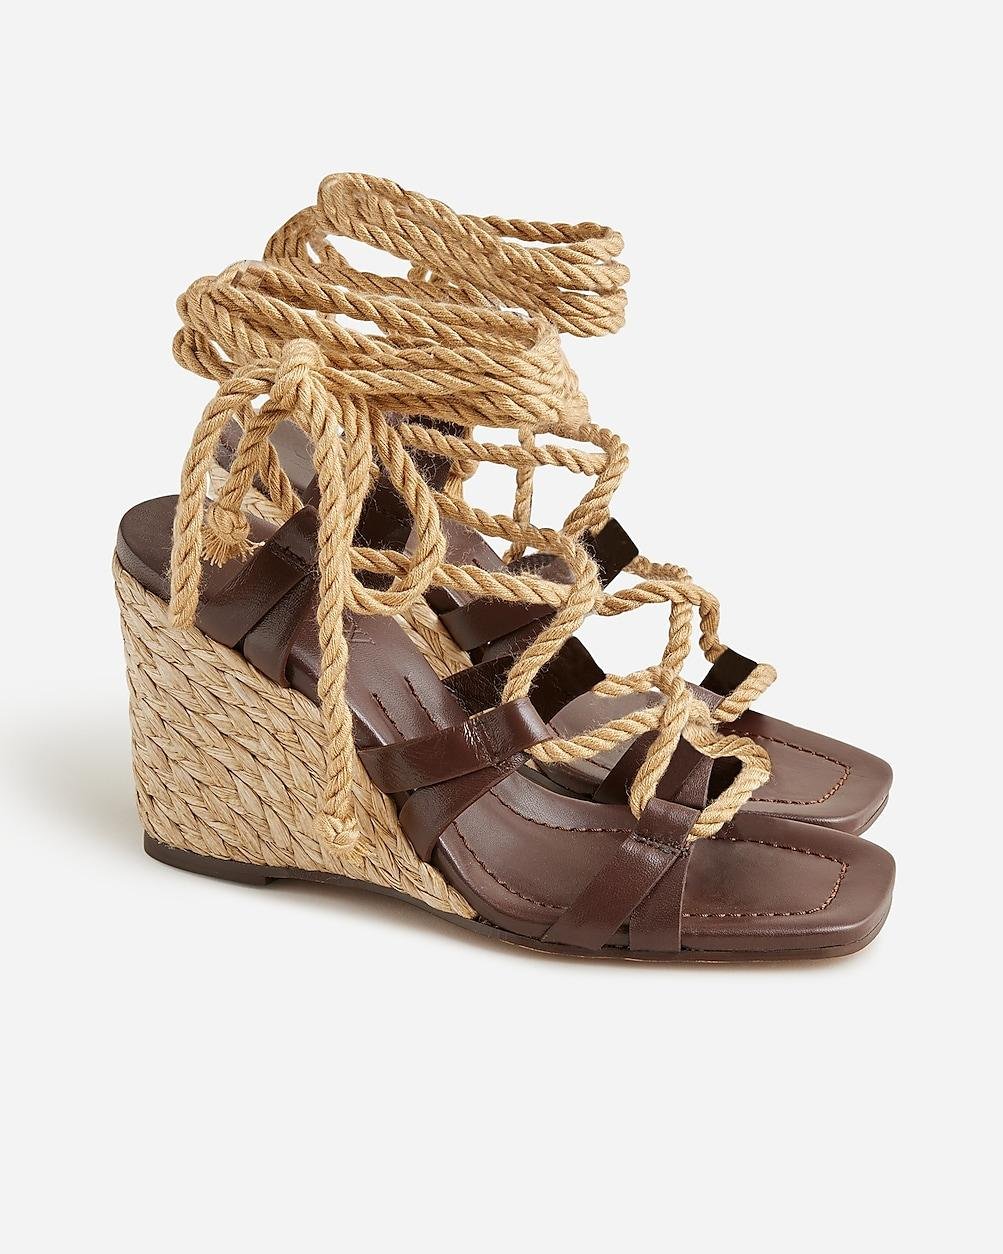 Made-in-Spain rope lace-up high-heel sandals in leather by J.CREW